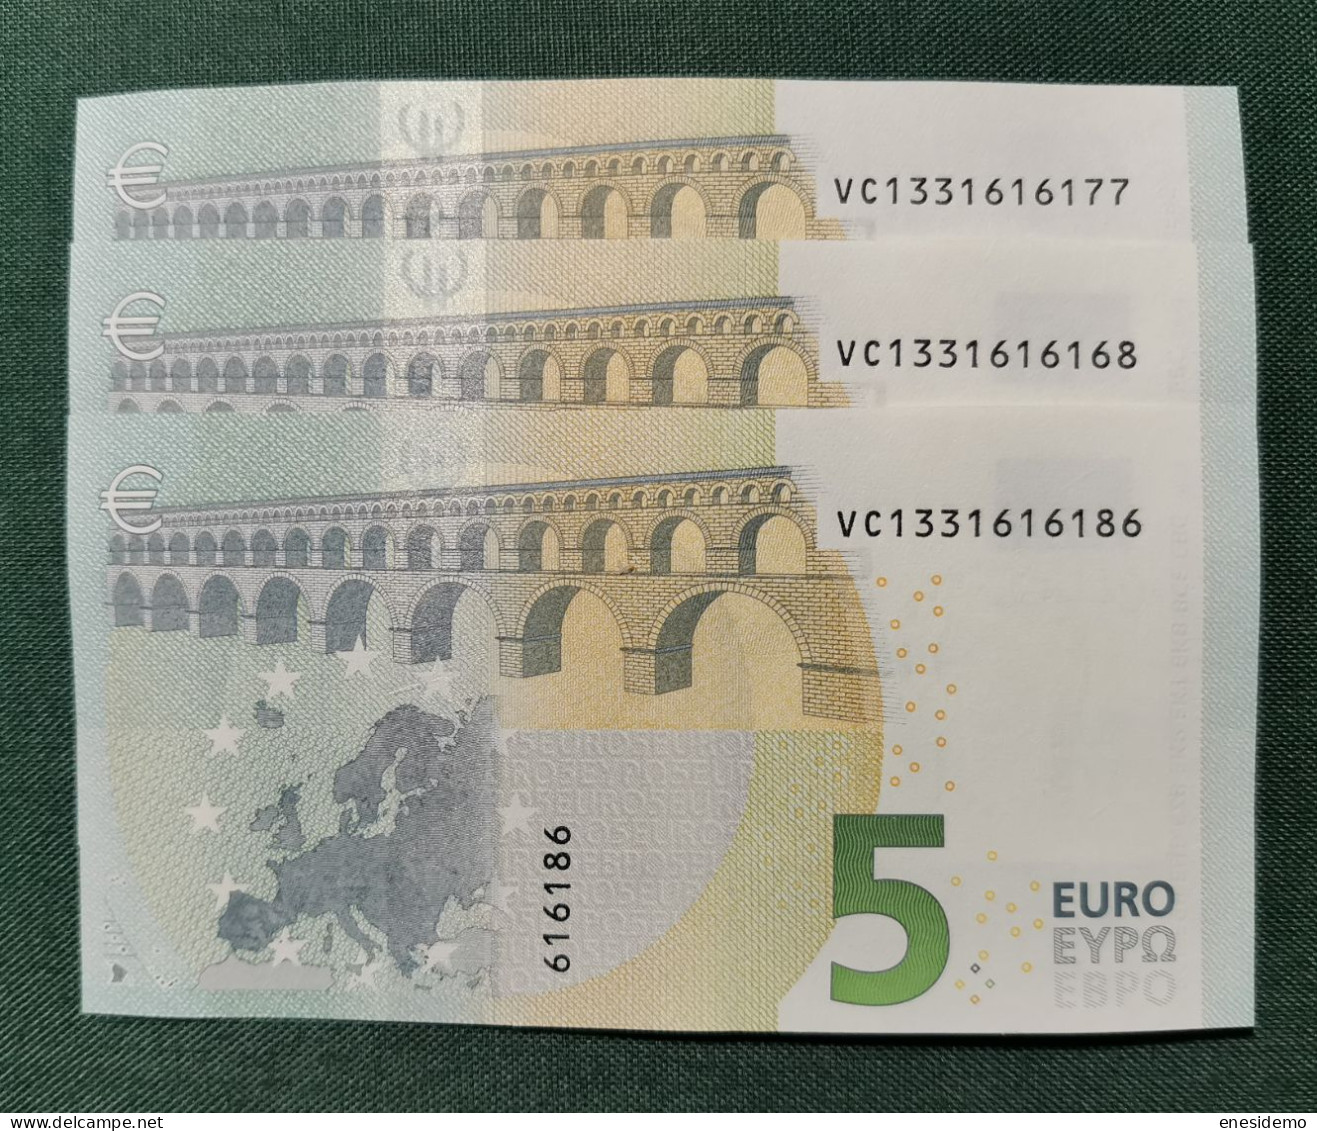 5 EURO SPAIN 2013 LAGARDE V014F5 VC CORRELATIVE TRIO SC FDS UNC. ONLY FOUR NUMBERS